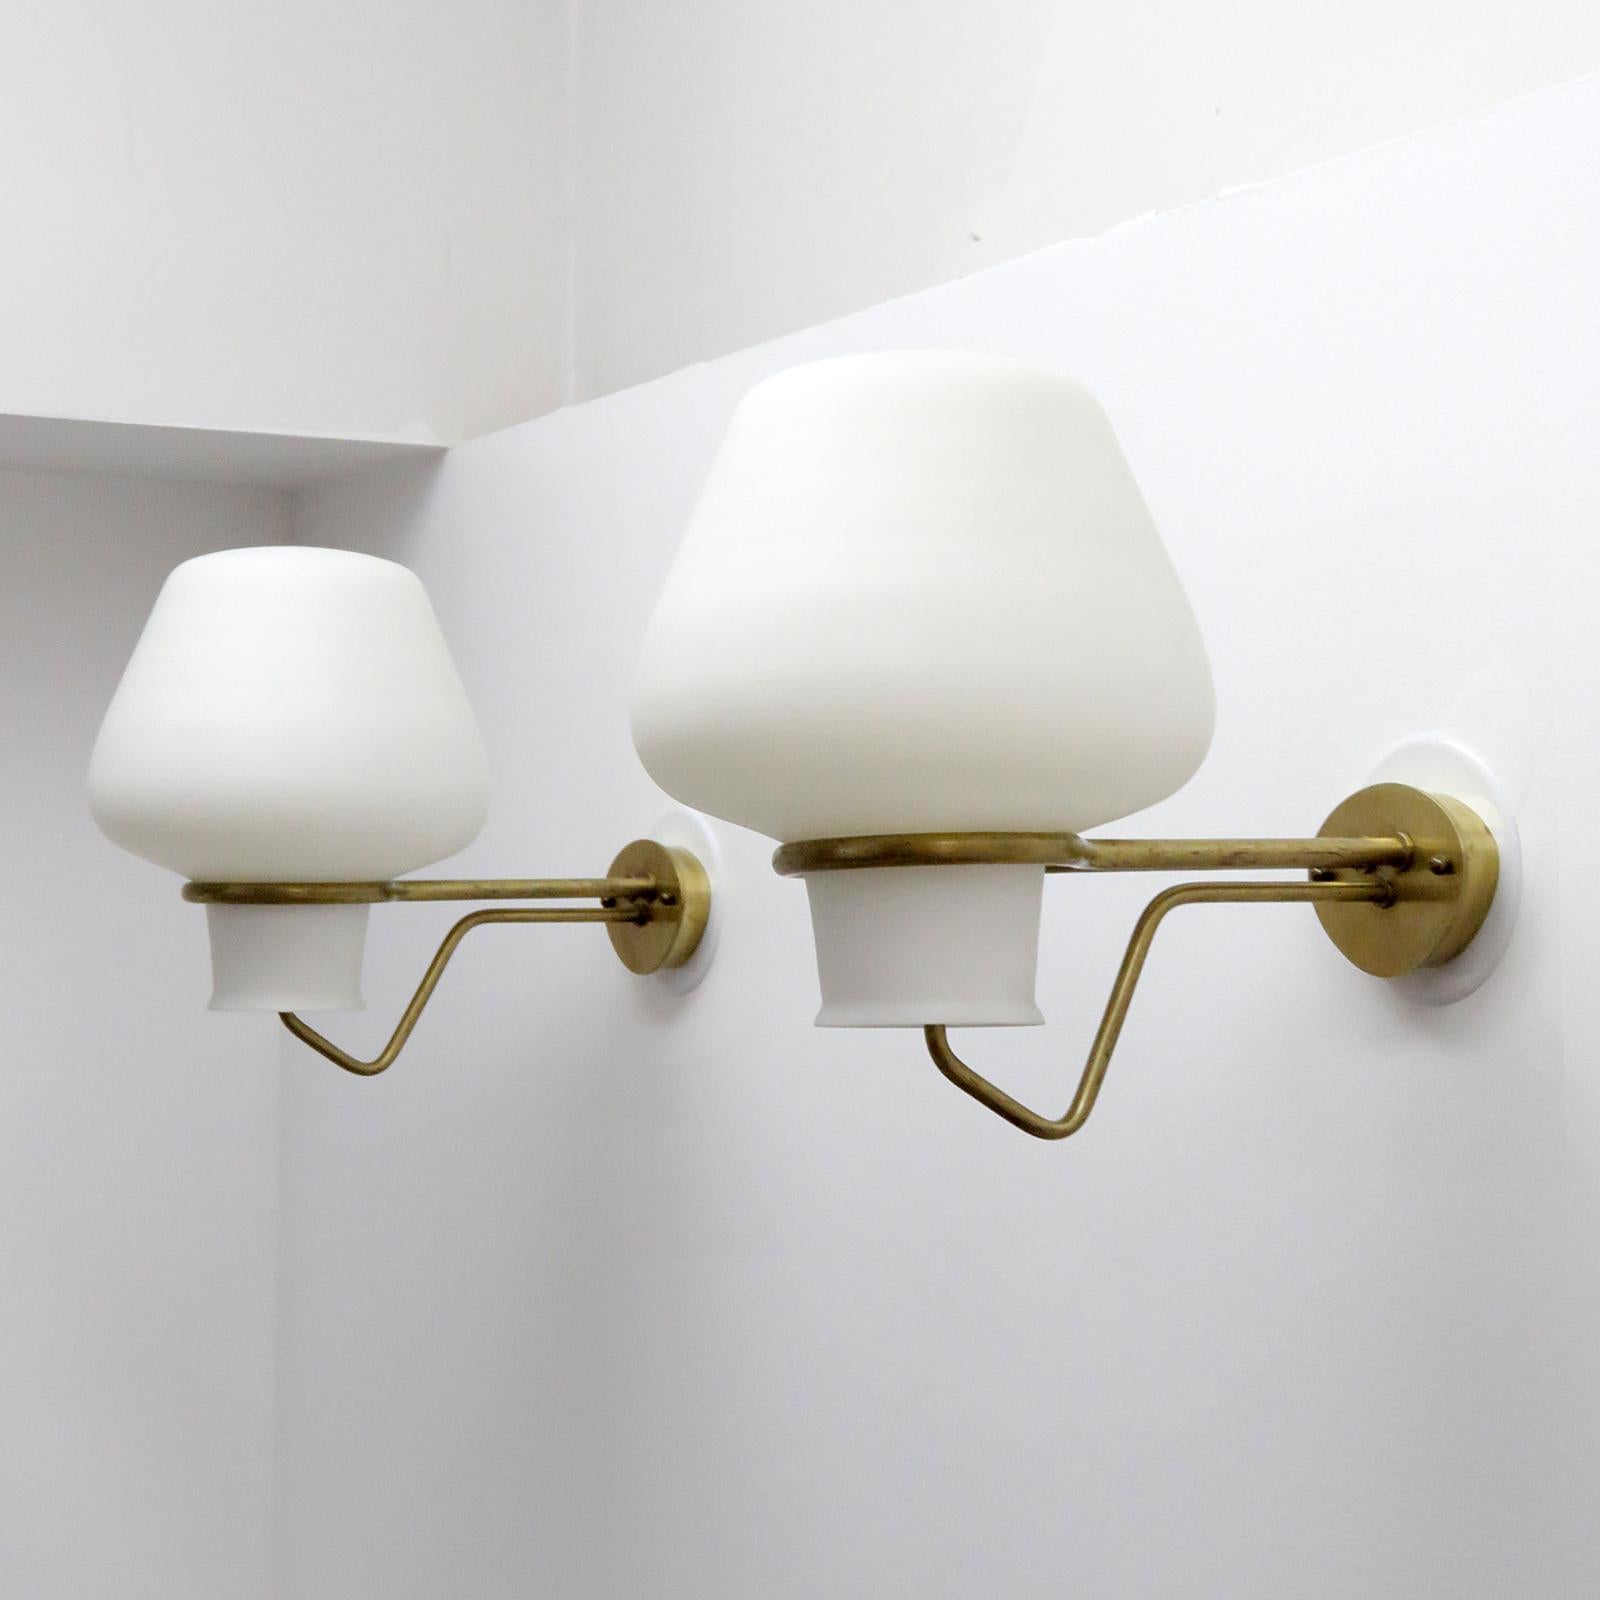 Elegant pair of large scale indoor/outdoor wall lights by Erik Gunnar Asplund for ASEA, Sweden, 1950 with matte opaline cased glass shades on minimalist brass arms.